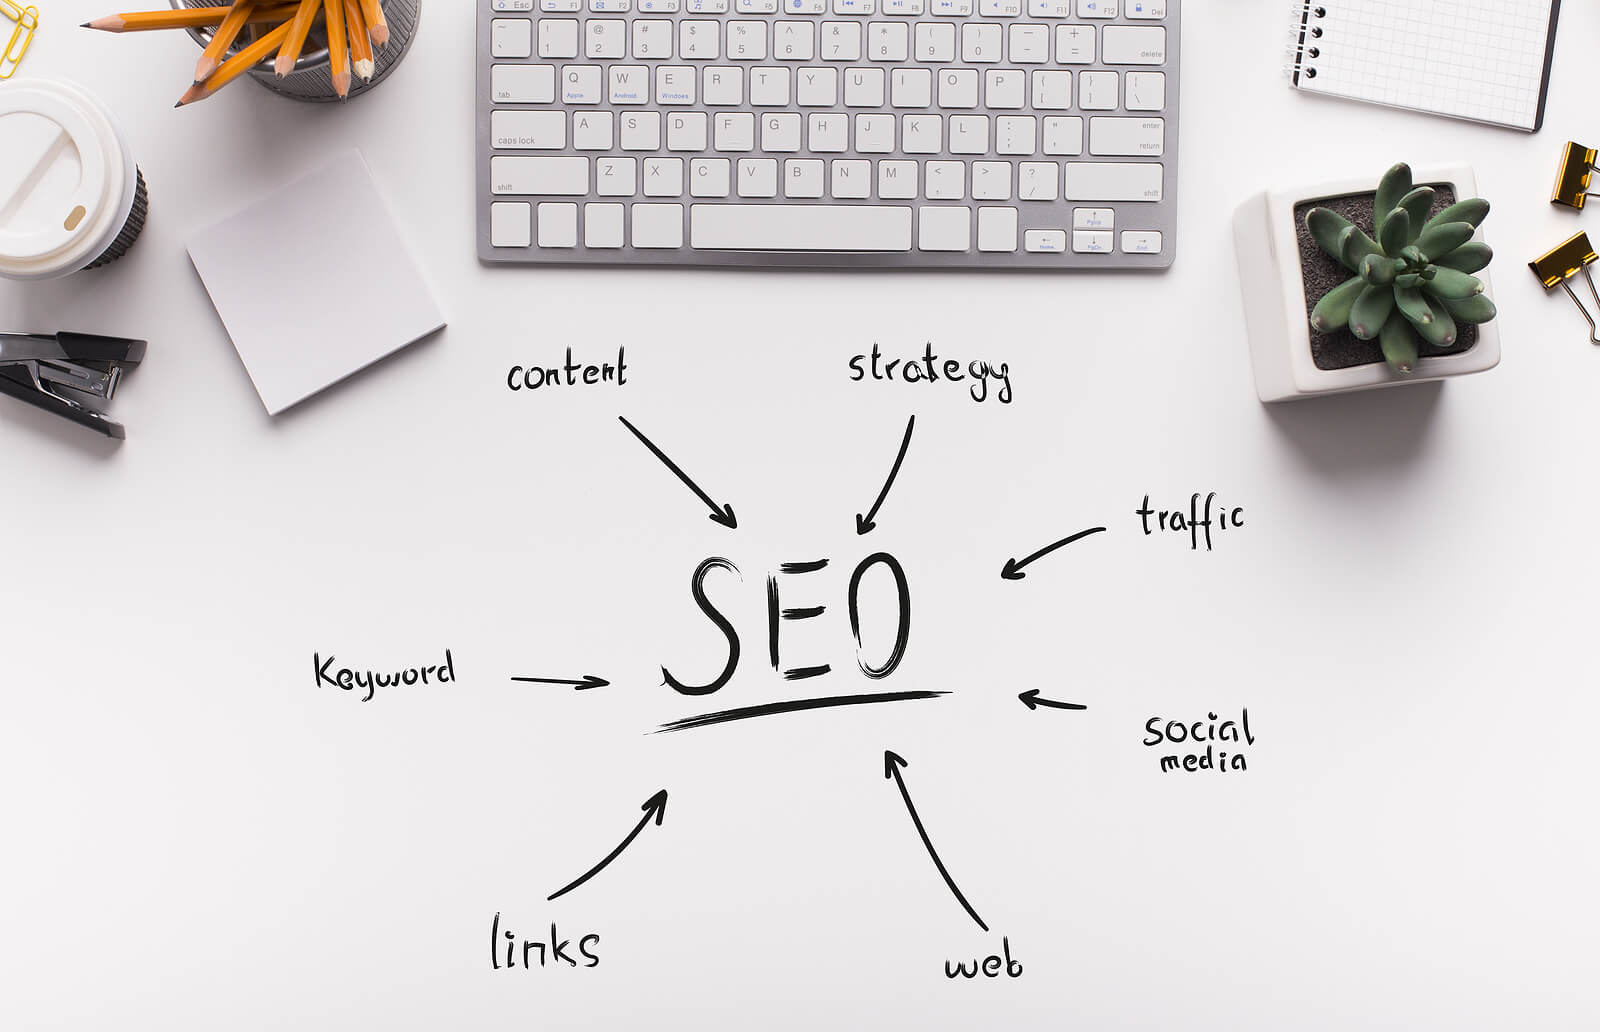 The words SEO written in black ink on a desk in front of a keyboard. Having troubling grasping SEO in healthcare. Let us help you become better at knowing SEO strategy for the healthcare industry